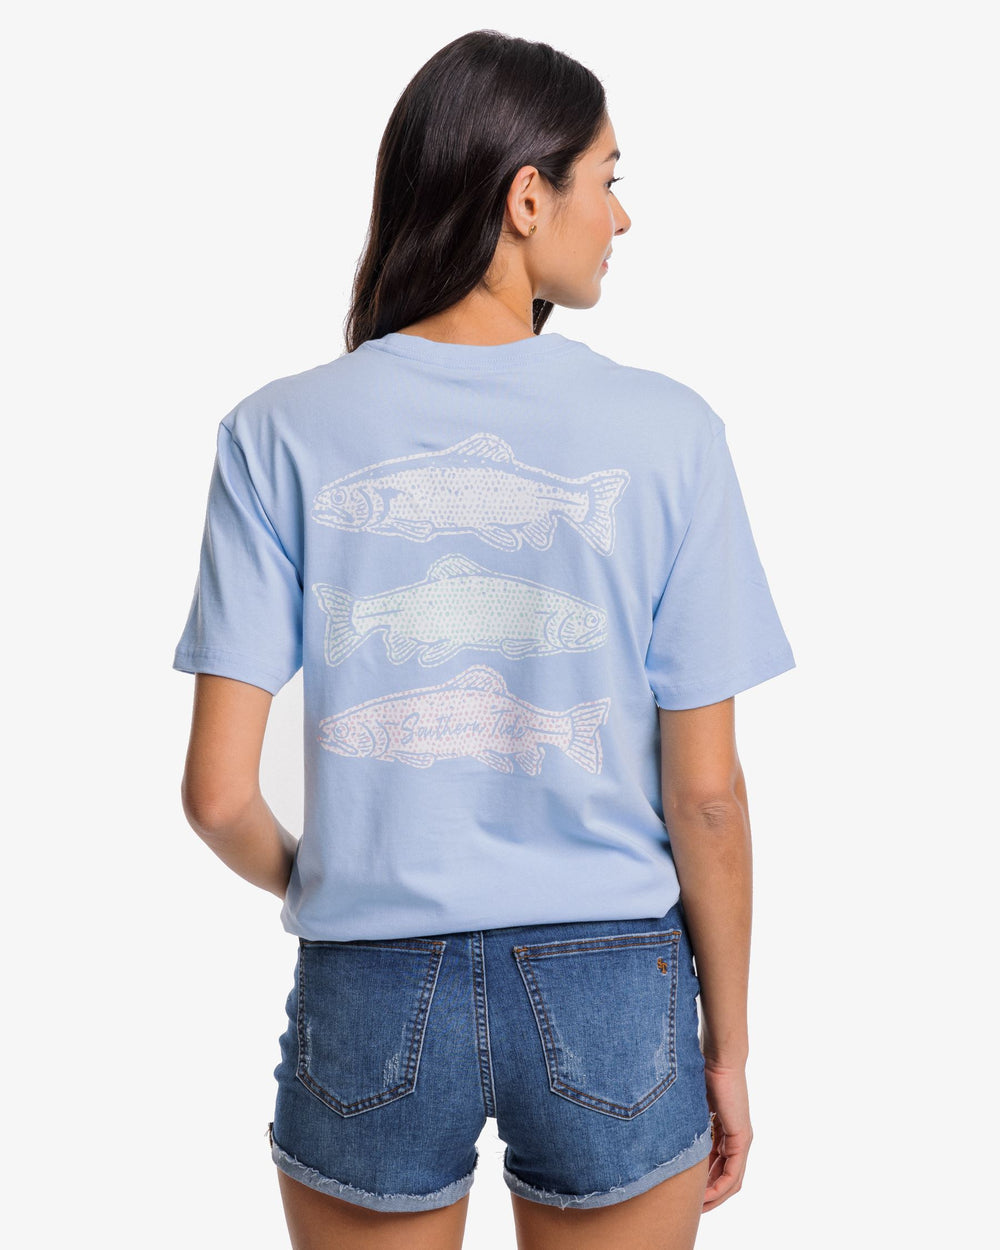 The back view of the Southern Tide Dotted Trout T-shirt by Southern Tide - Sky Blue